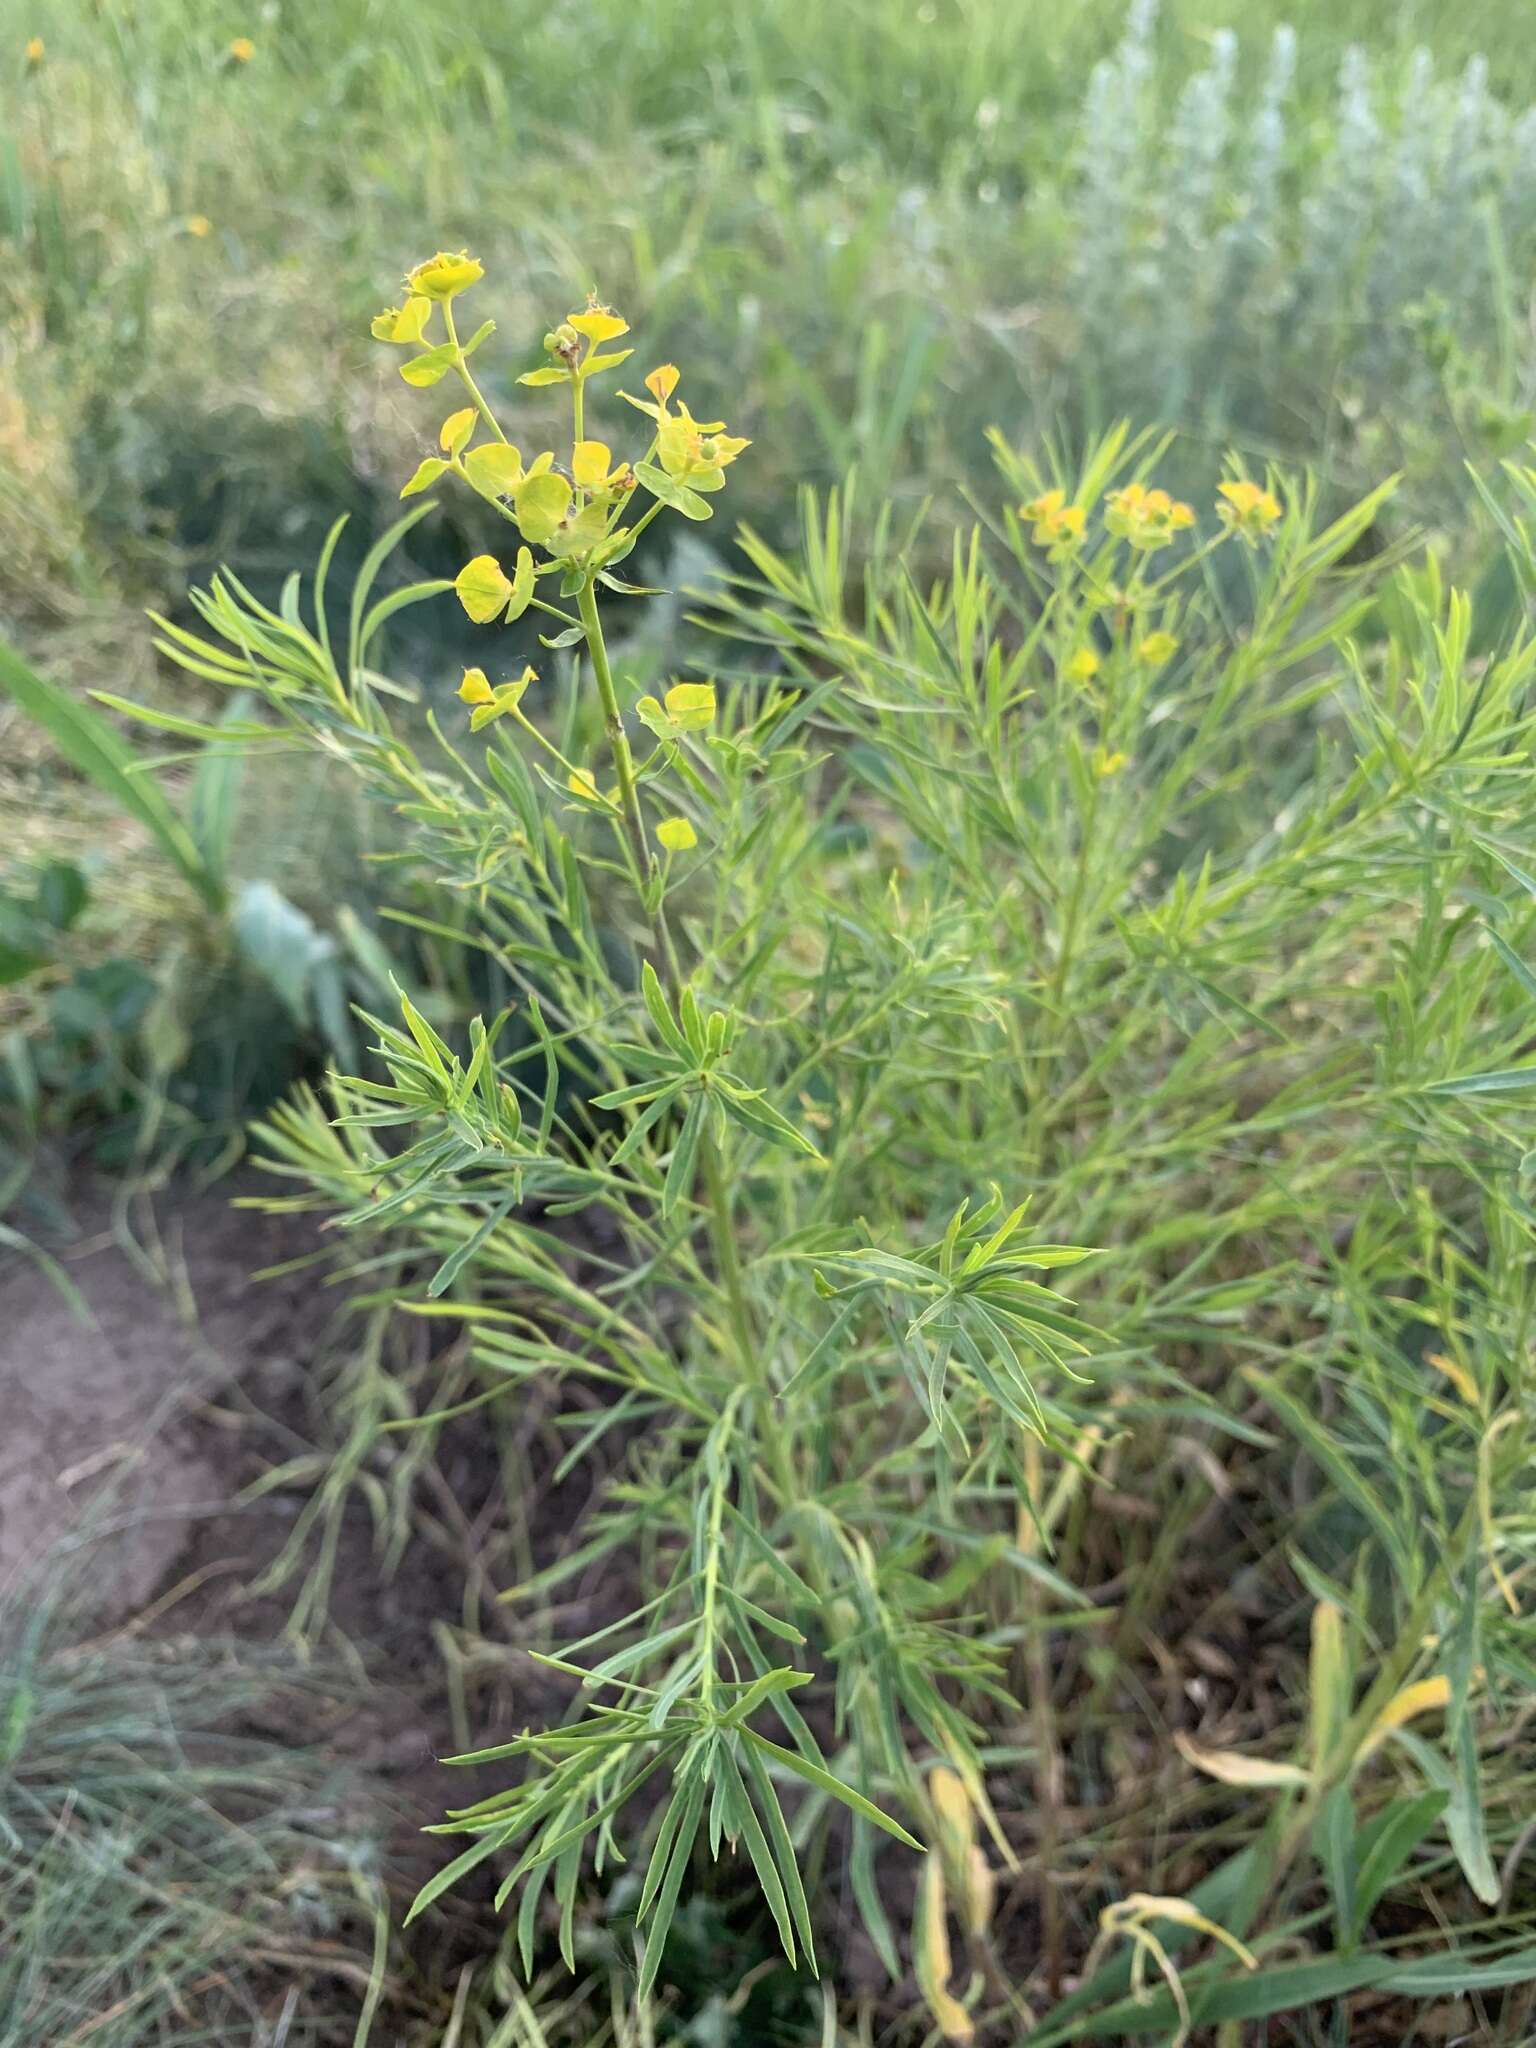 Image of Russian leafy spurge